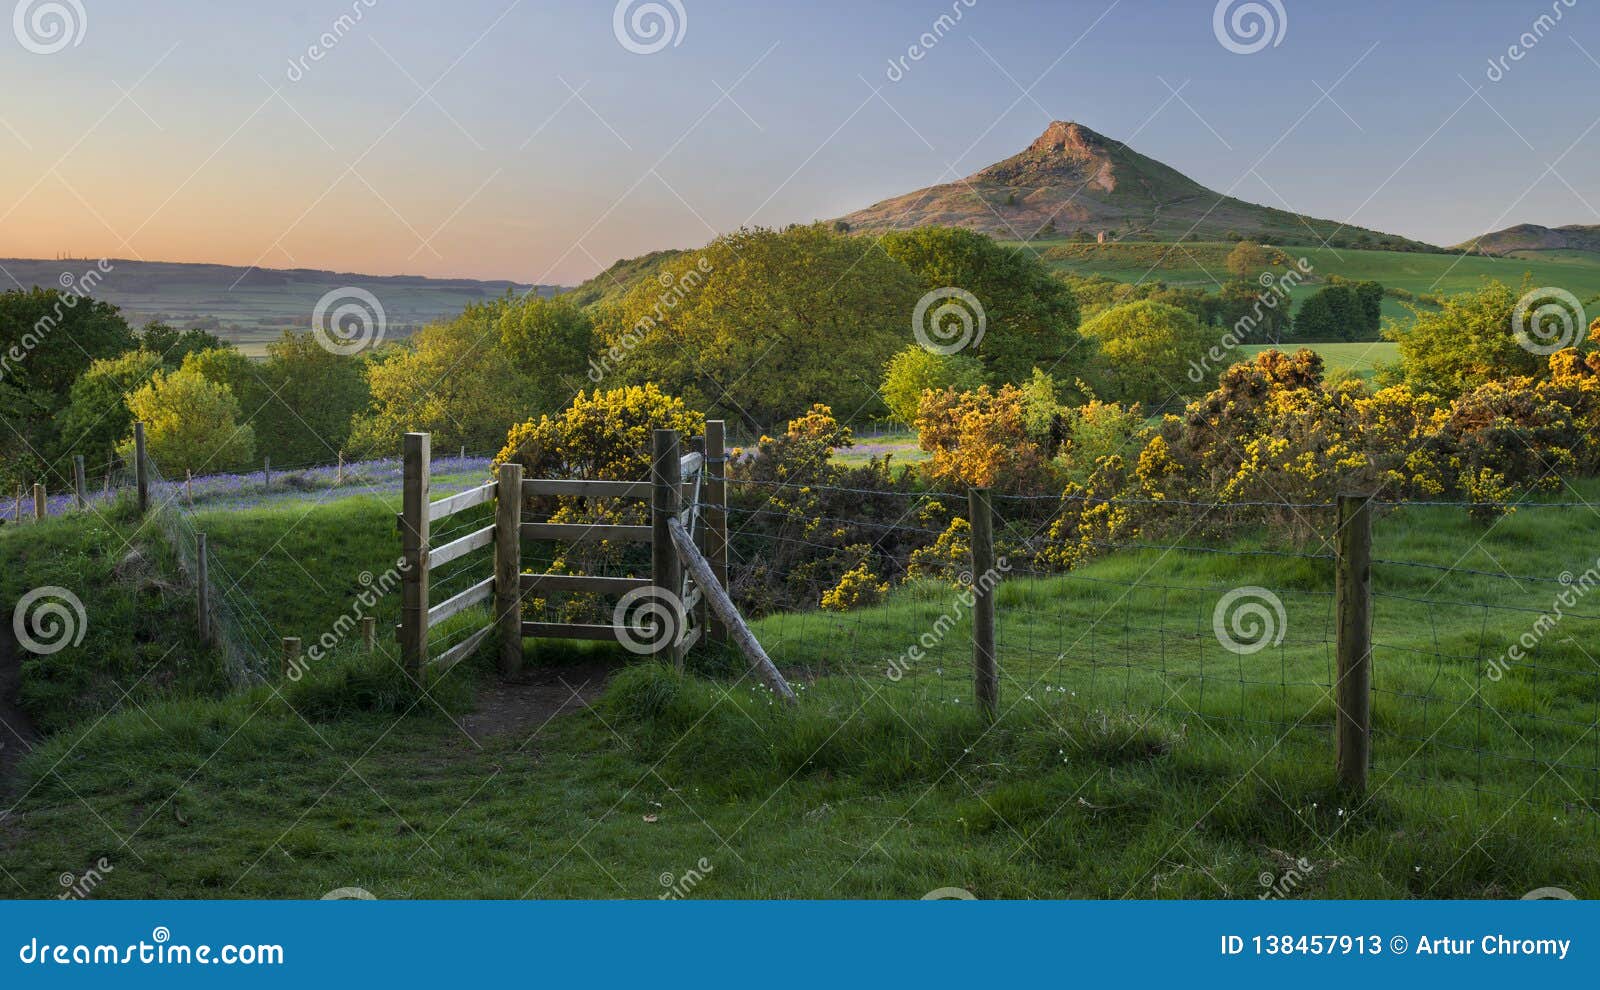 beautiful sunset , unusual, marvelous the roseberry topping